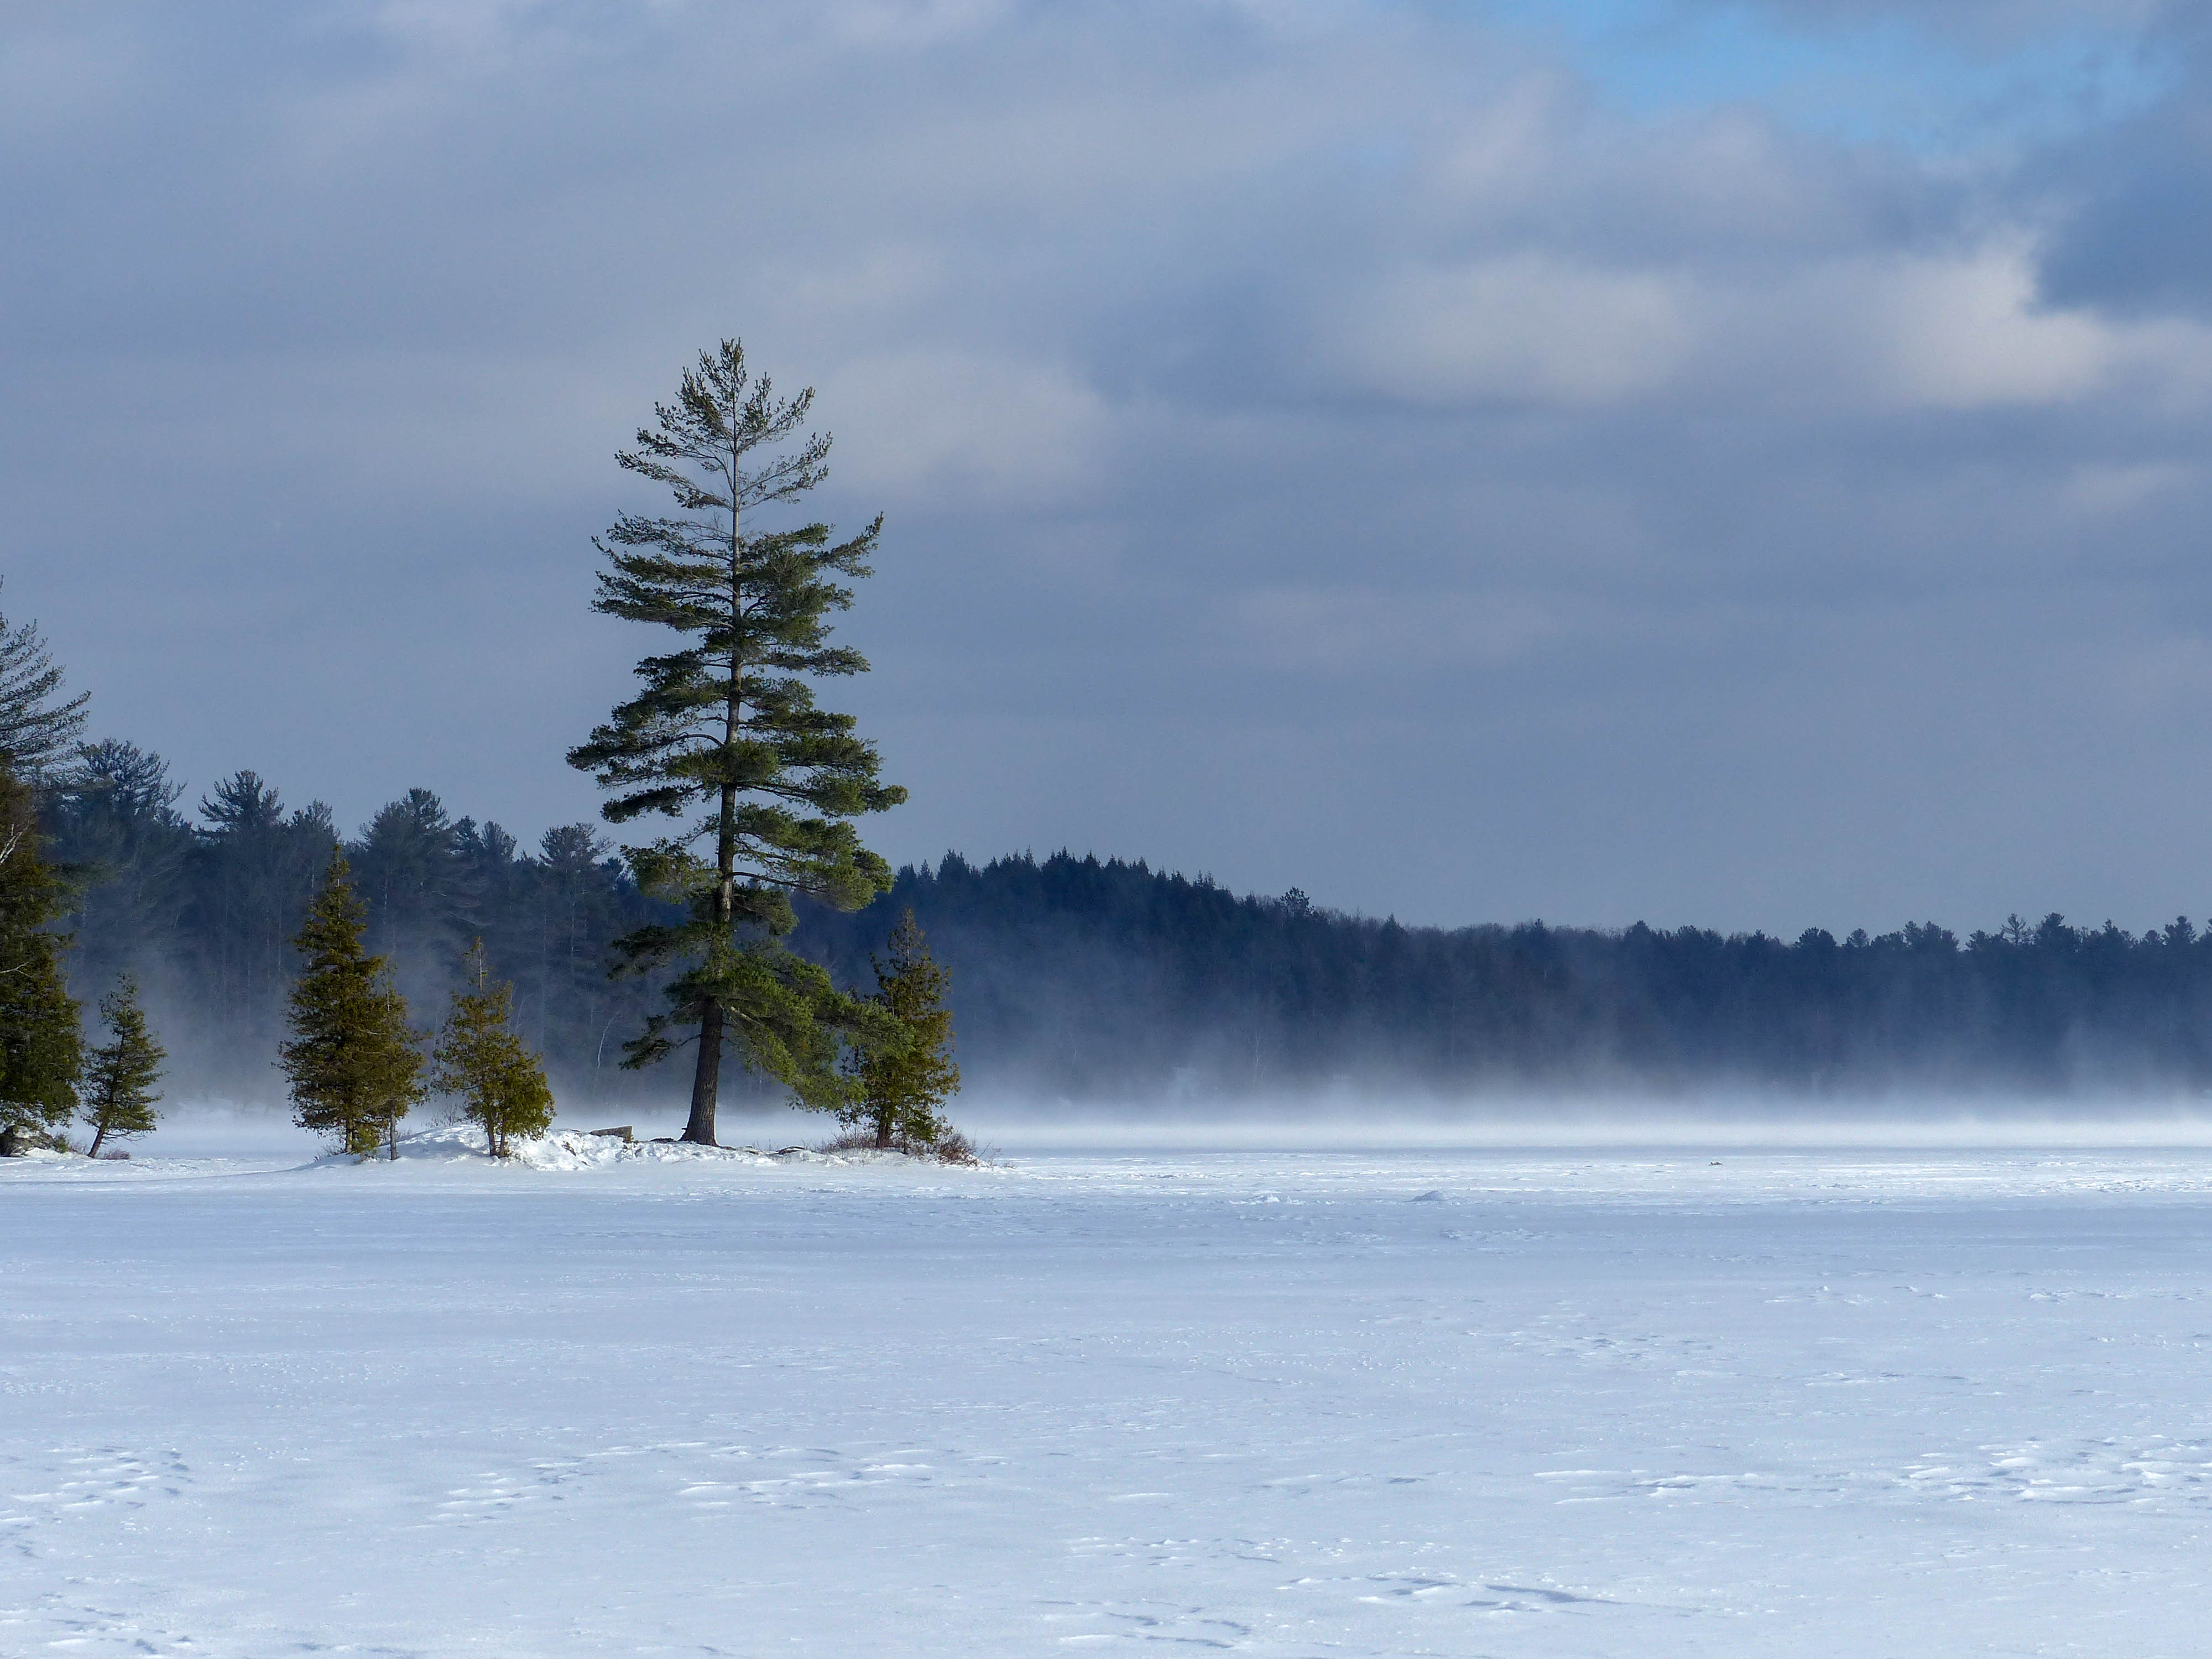 Silent Lake Provincial Park - frozen lake and wind blowing the snow